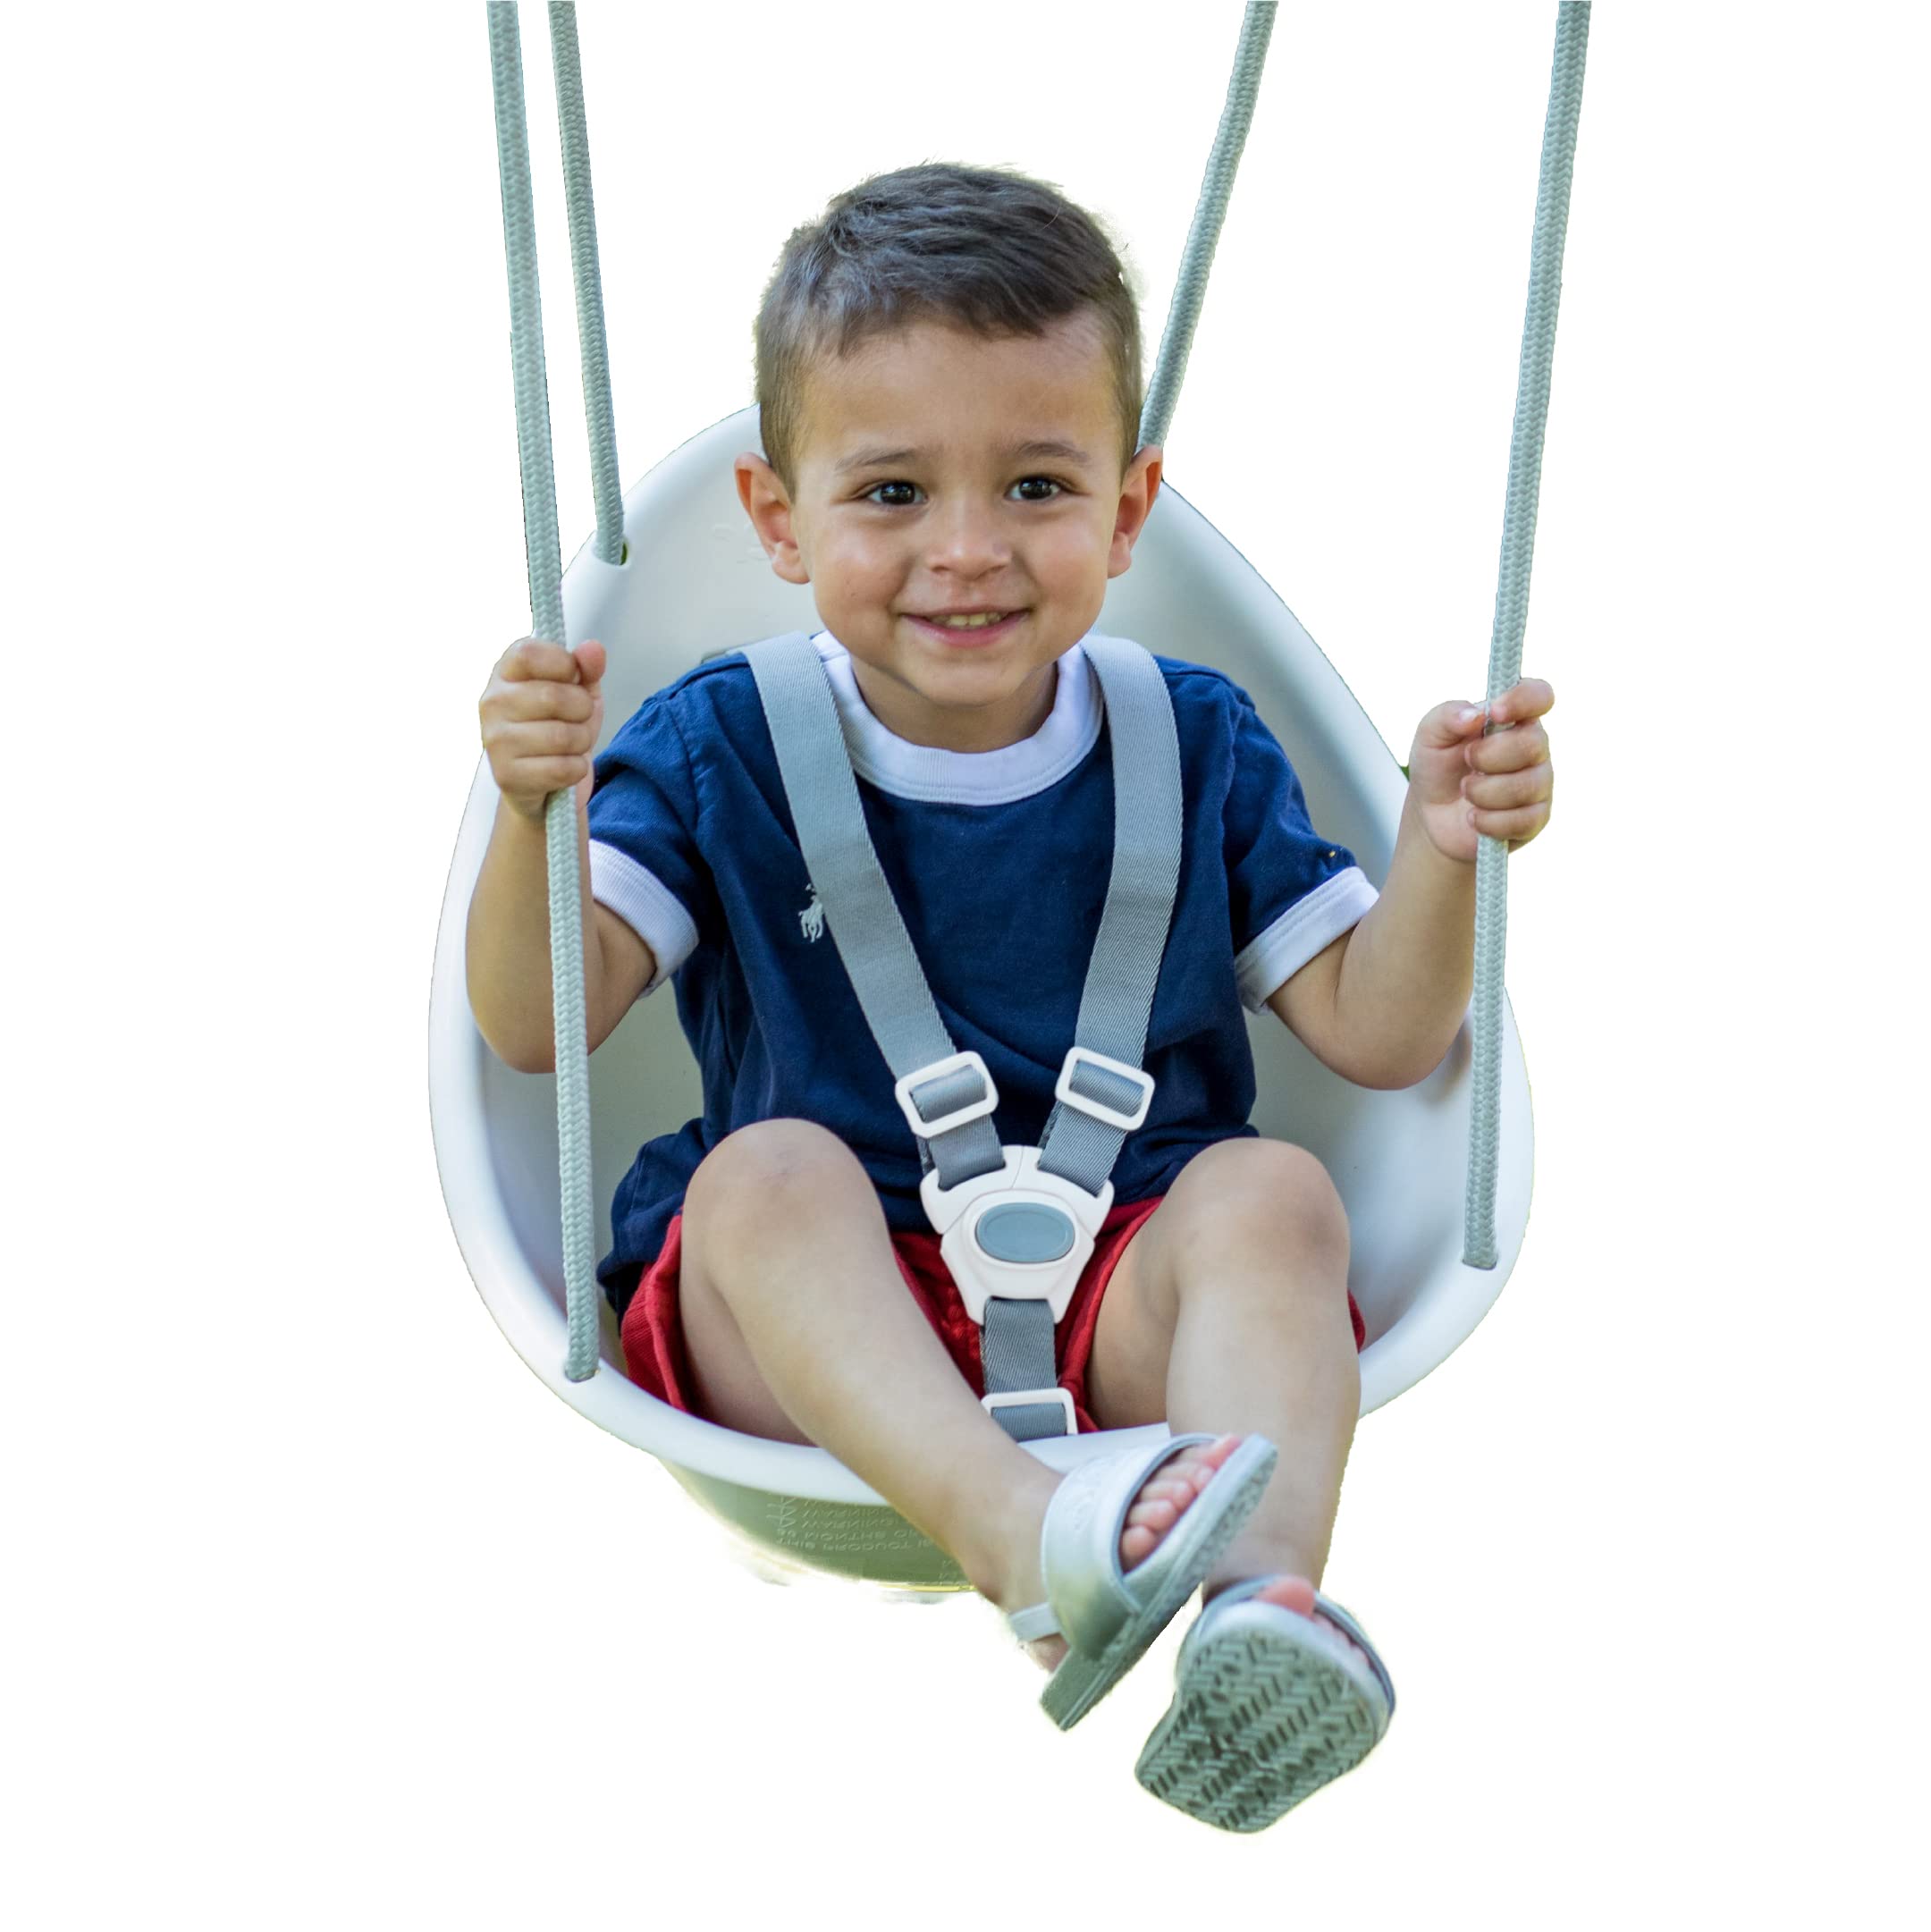 Swurfer Coconut Toddler Swing – Comfy Baby Swing Outdoor, 3- Point Adjustable Safety Harness, Secure, Safe Quick Click Locking System, Blister-Free Rope, Easy Installation, Ages 6-36 Months